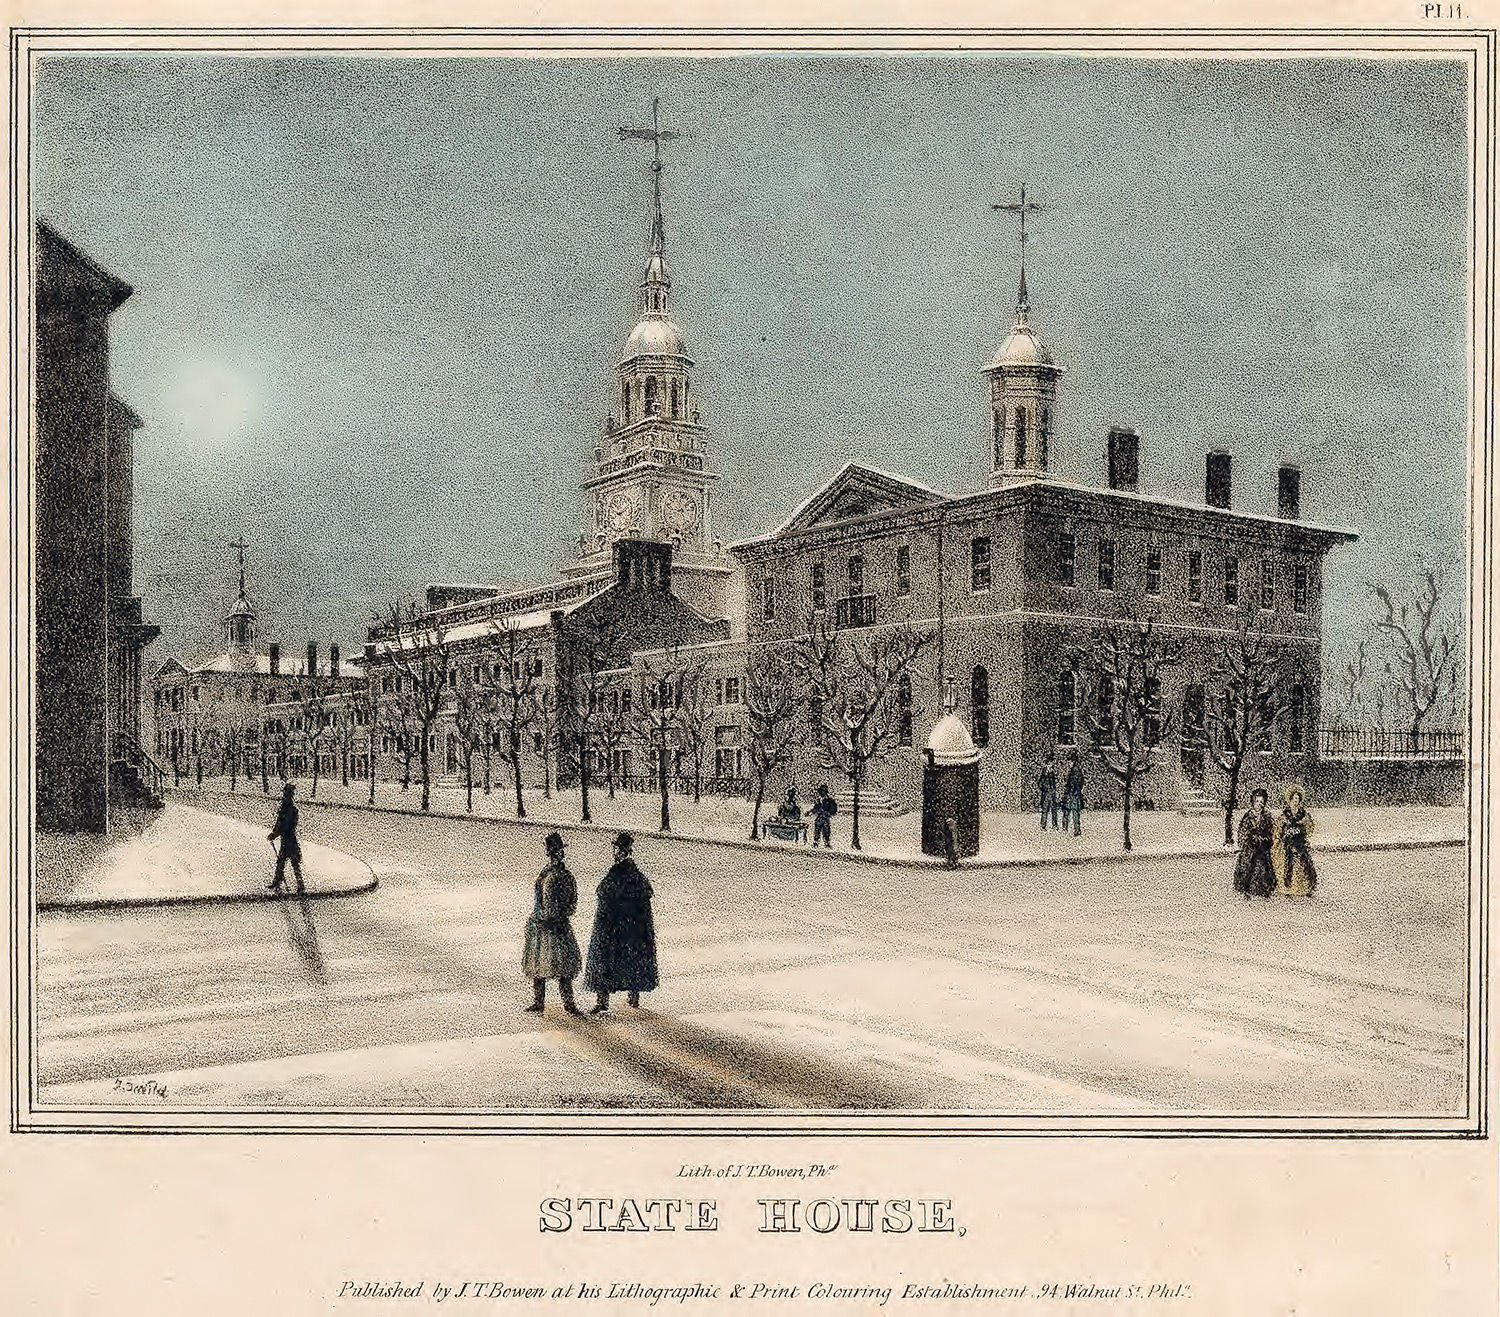 The corner view of a stately building and snowy streetscape, with various men and women standing or walking about. 